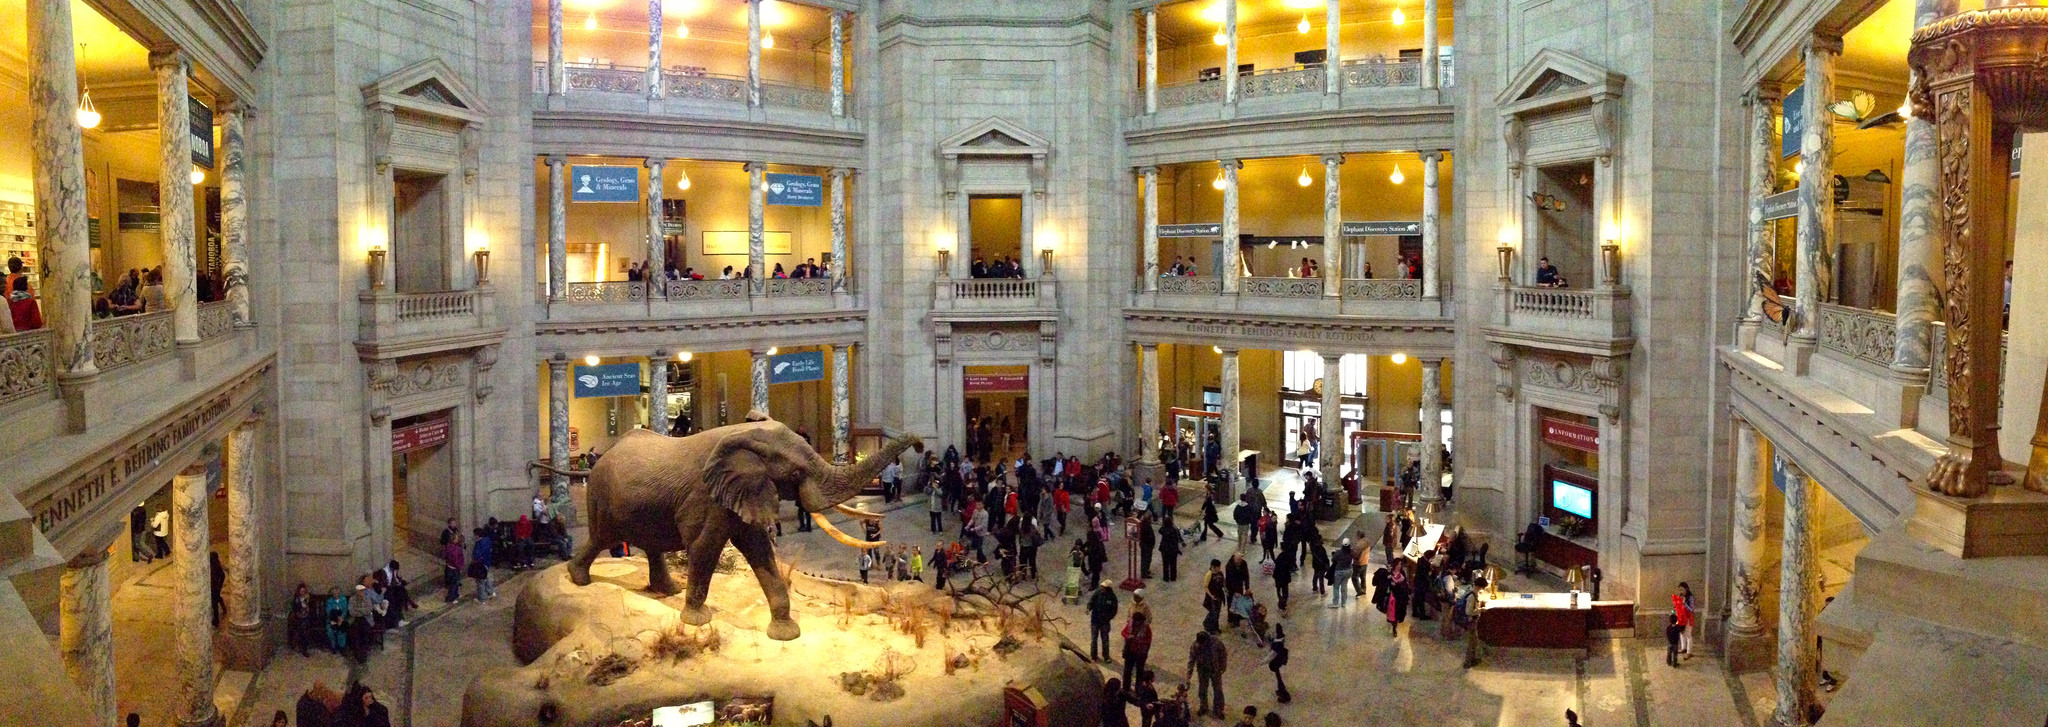 Smithsonian Museum of Natural History, photo by Blake Patterson